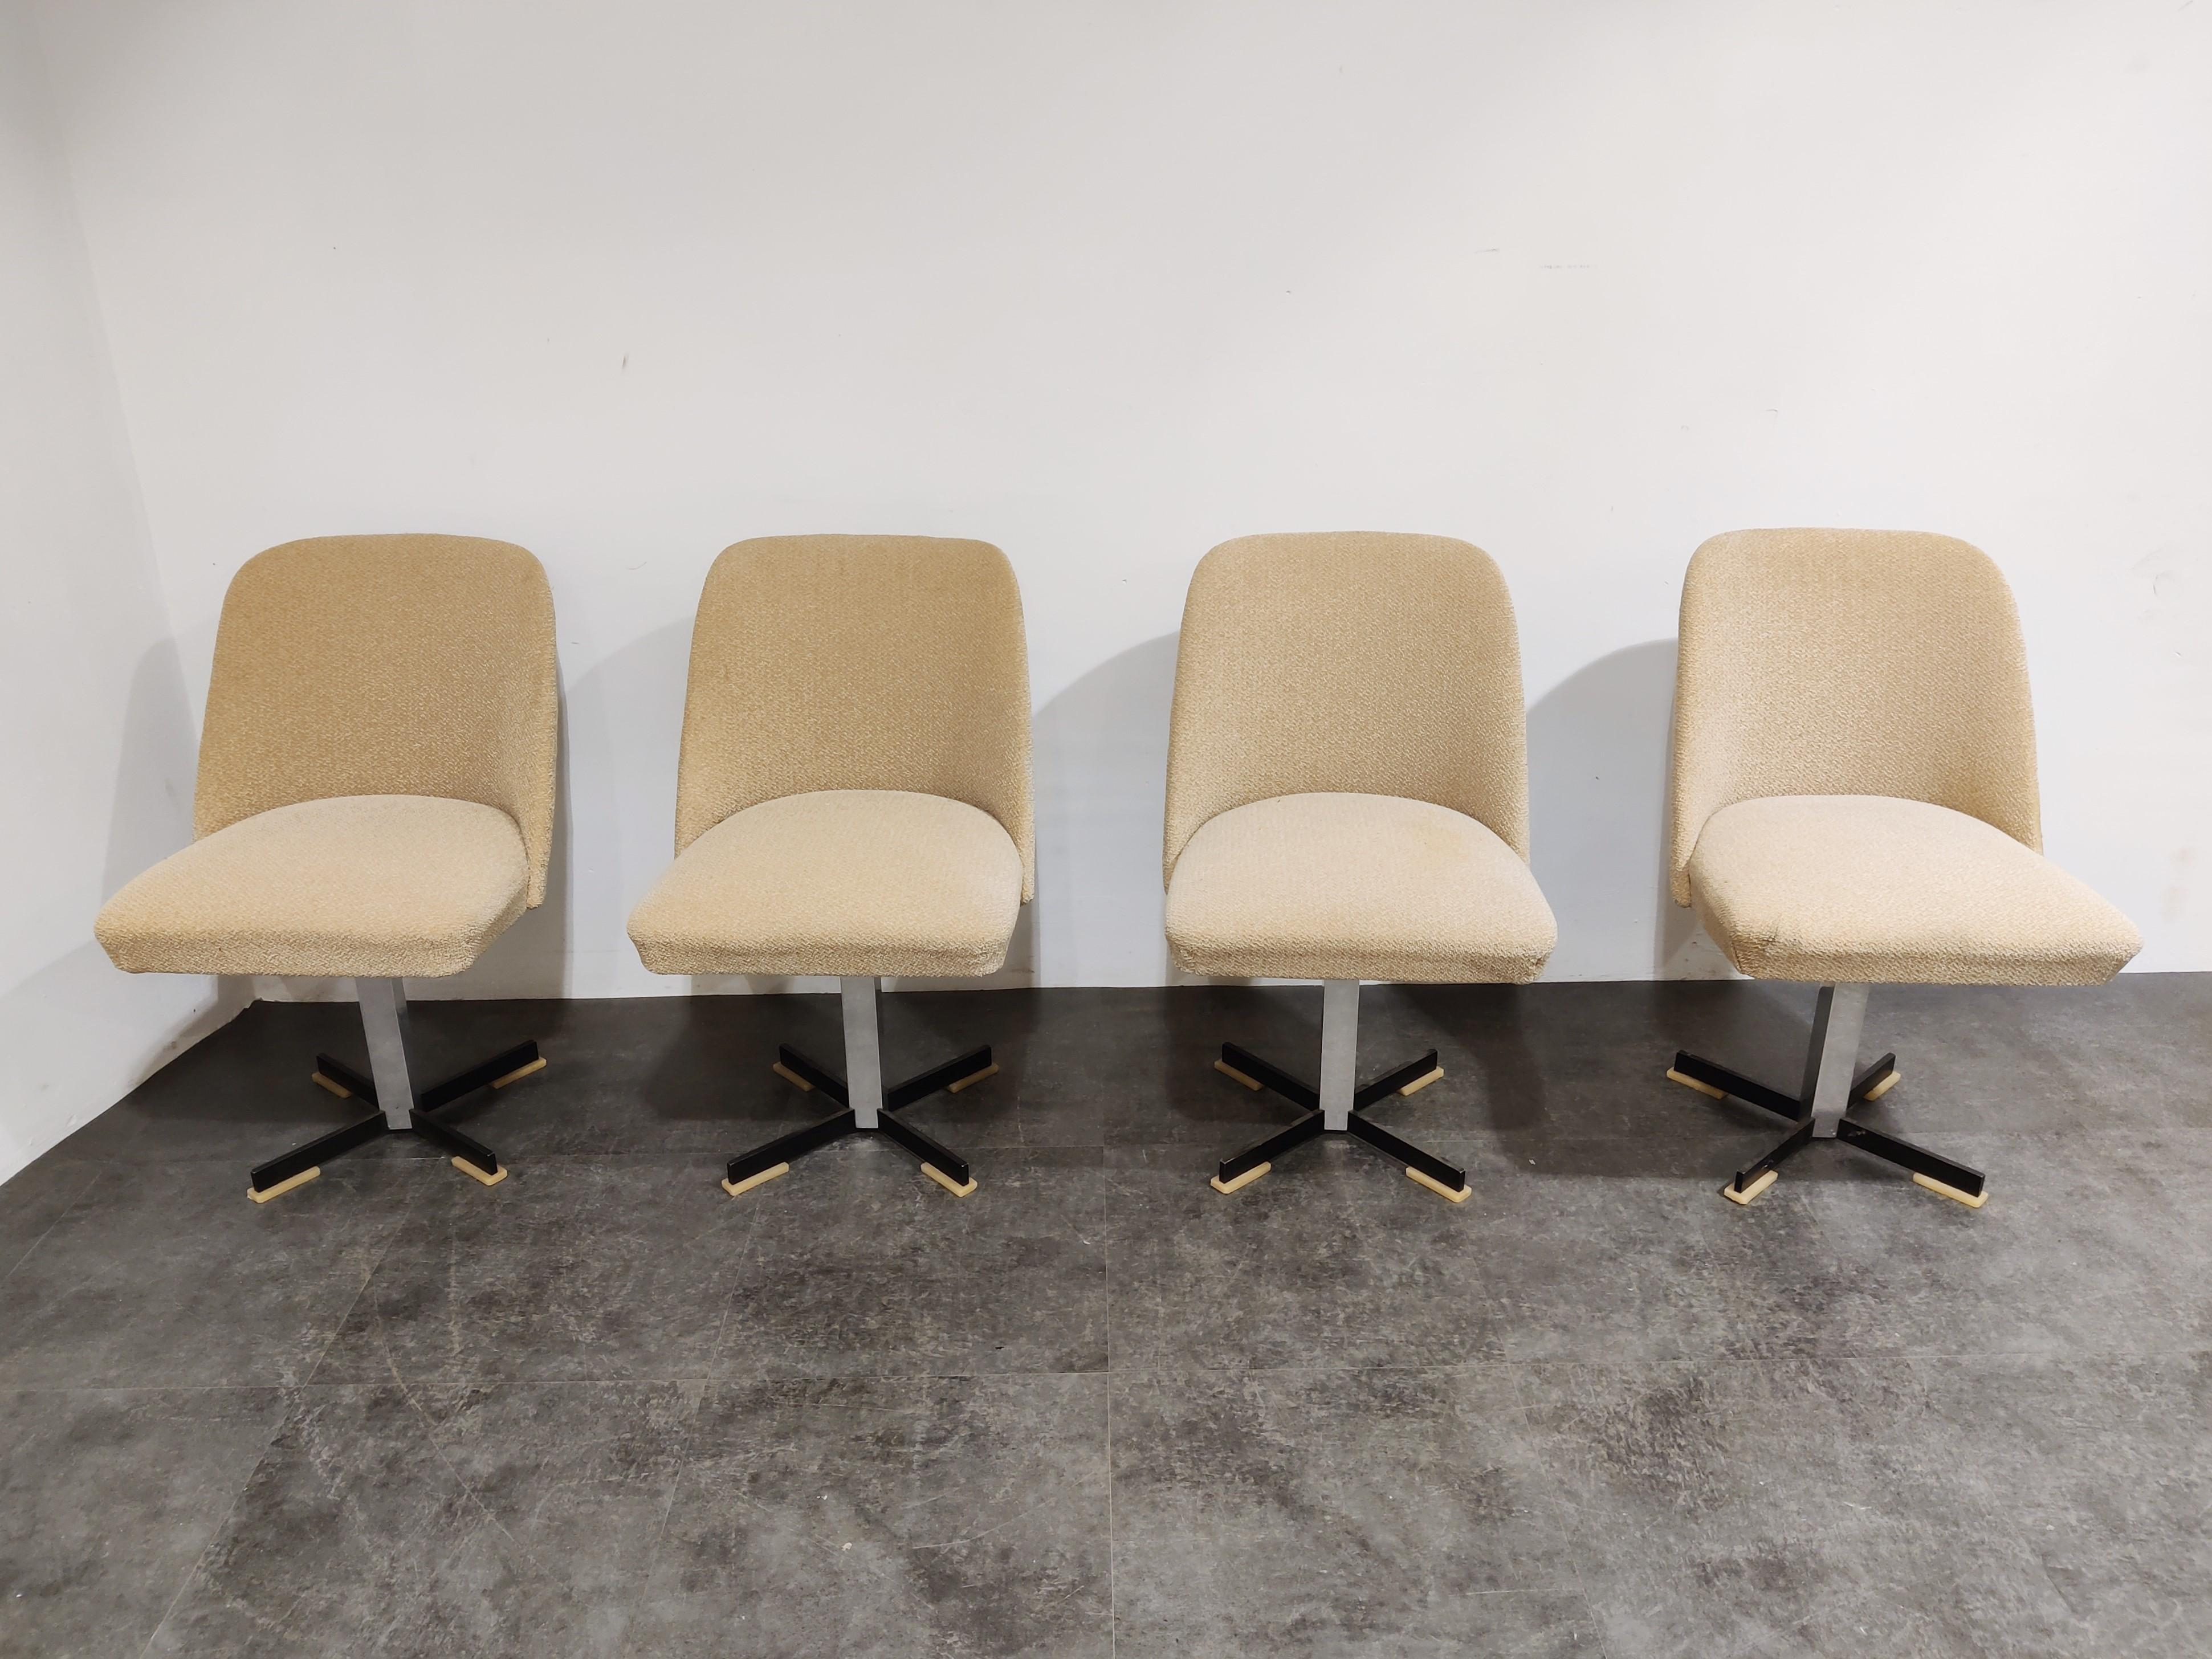 Set of 4 mid century fabric wivel chairs on a chrome and black metal base.

Beautiful original mid century chairs with their original white/beige fabric. 

1960s - Germany

Height: 80cm/31.49